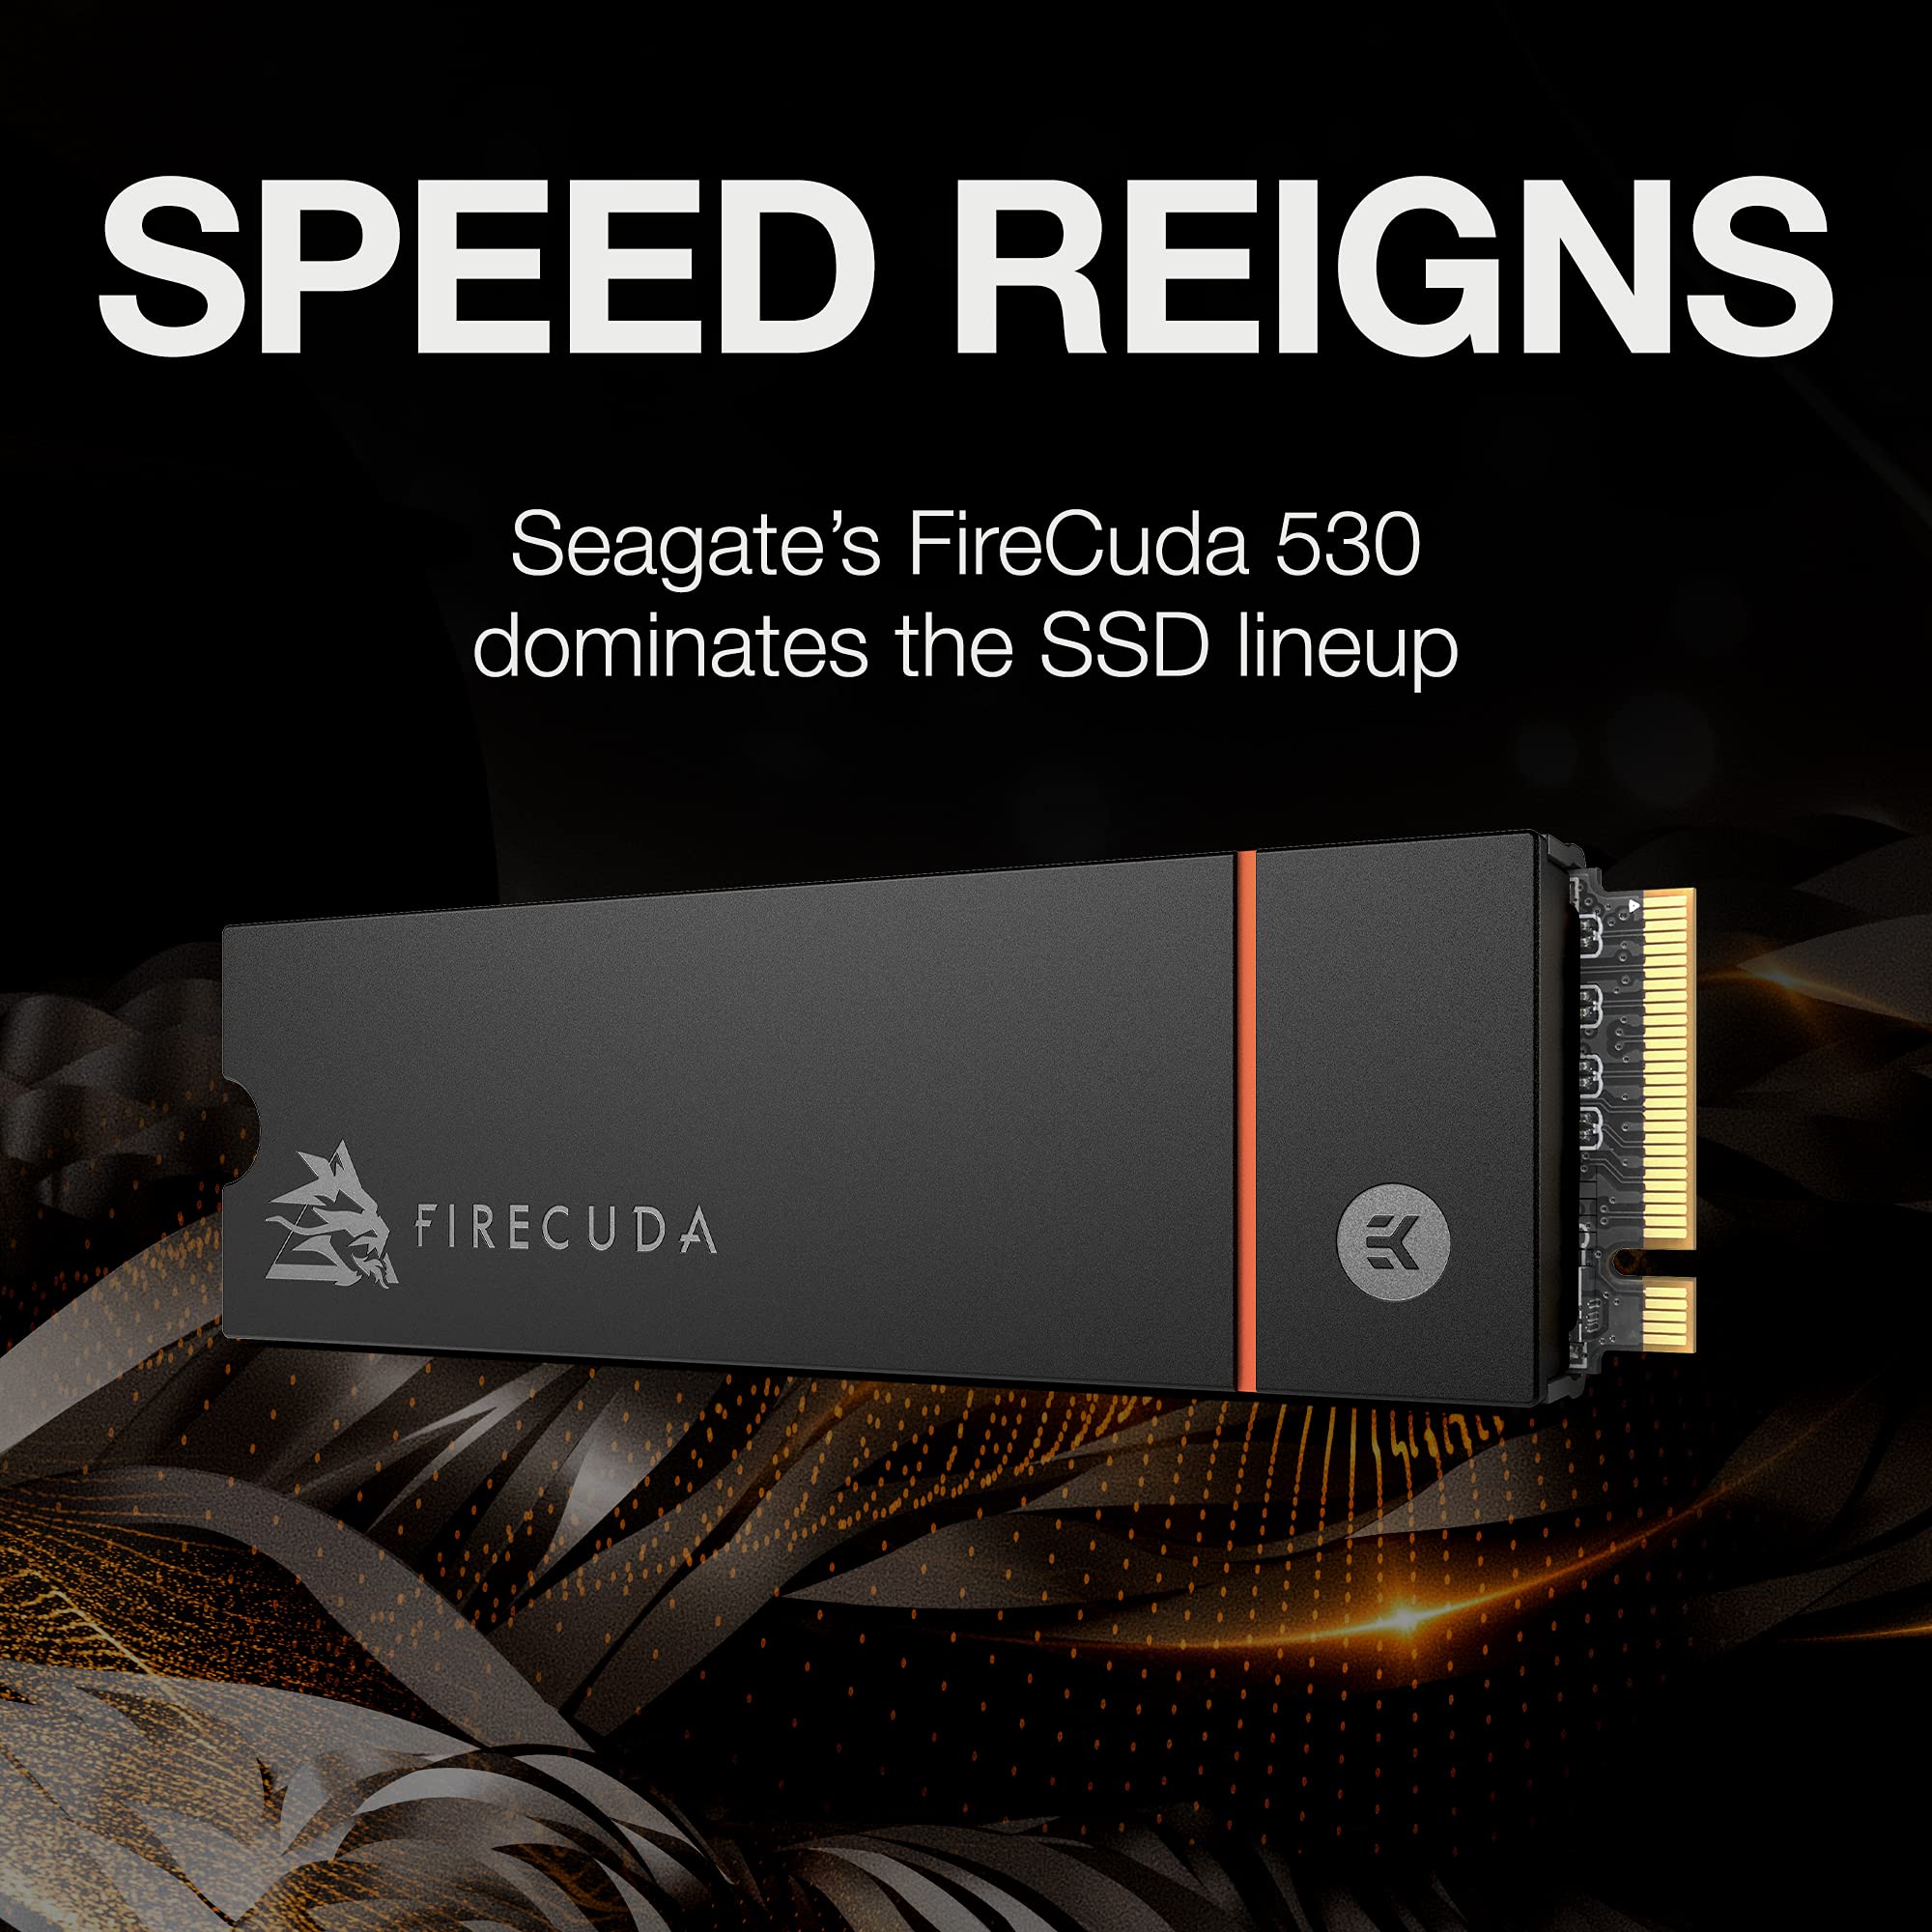 Seagate FireCuda 530, 4 TB, Internal Solid State Drive - M.2 PCIe Gen4 ×4 NVMe 1.4, transfer speeds up to 7,300 MB/s, 3D TLC NAND, 5,100 TBW, Heatsink, 3 year Rescue Services (ZP4000GM3A023)